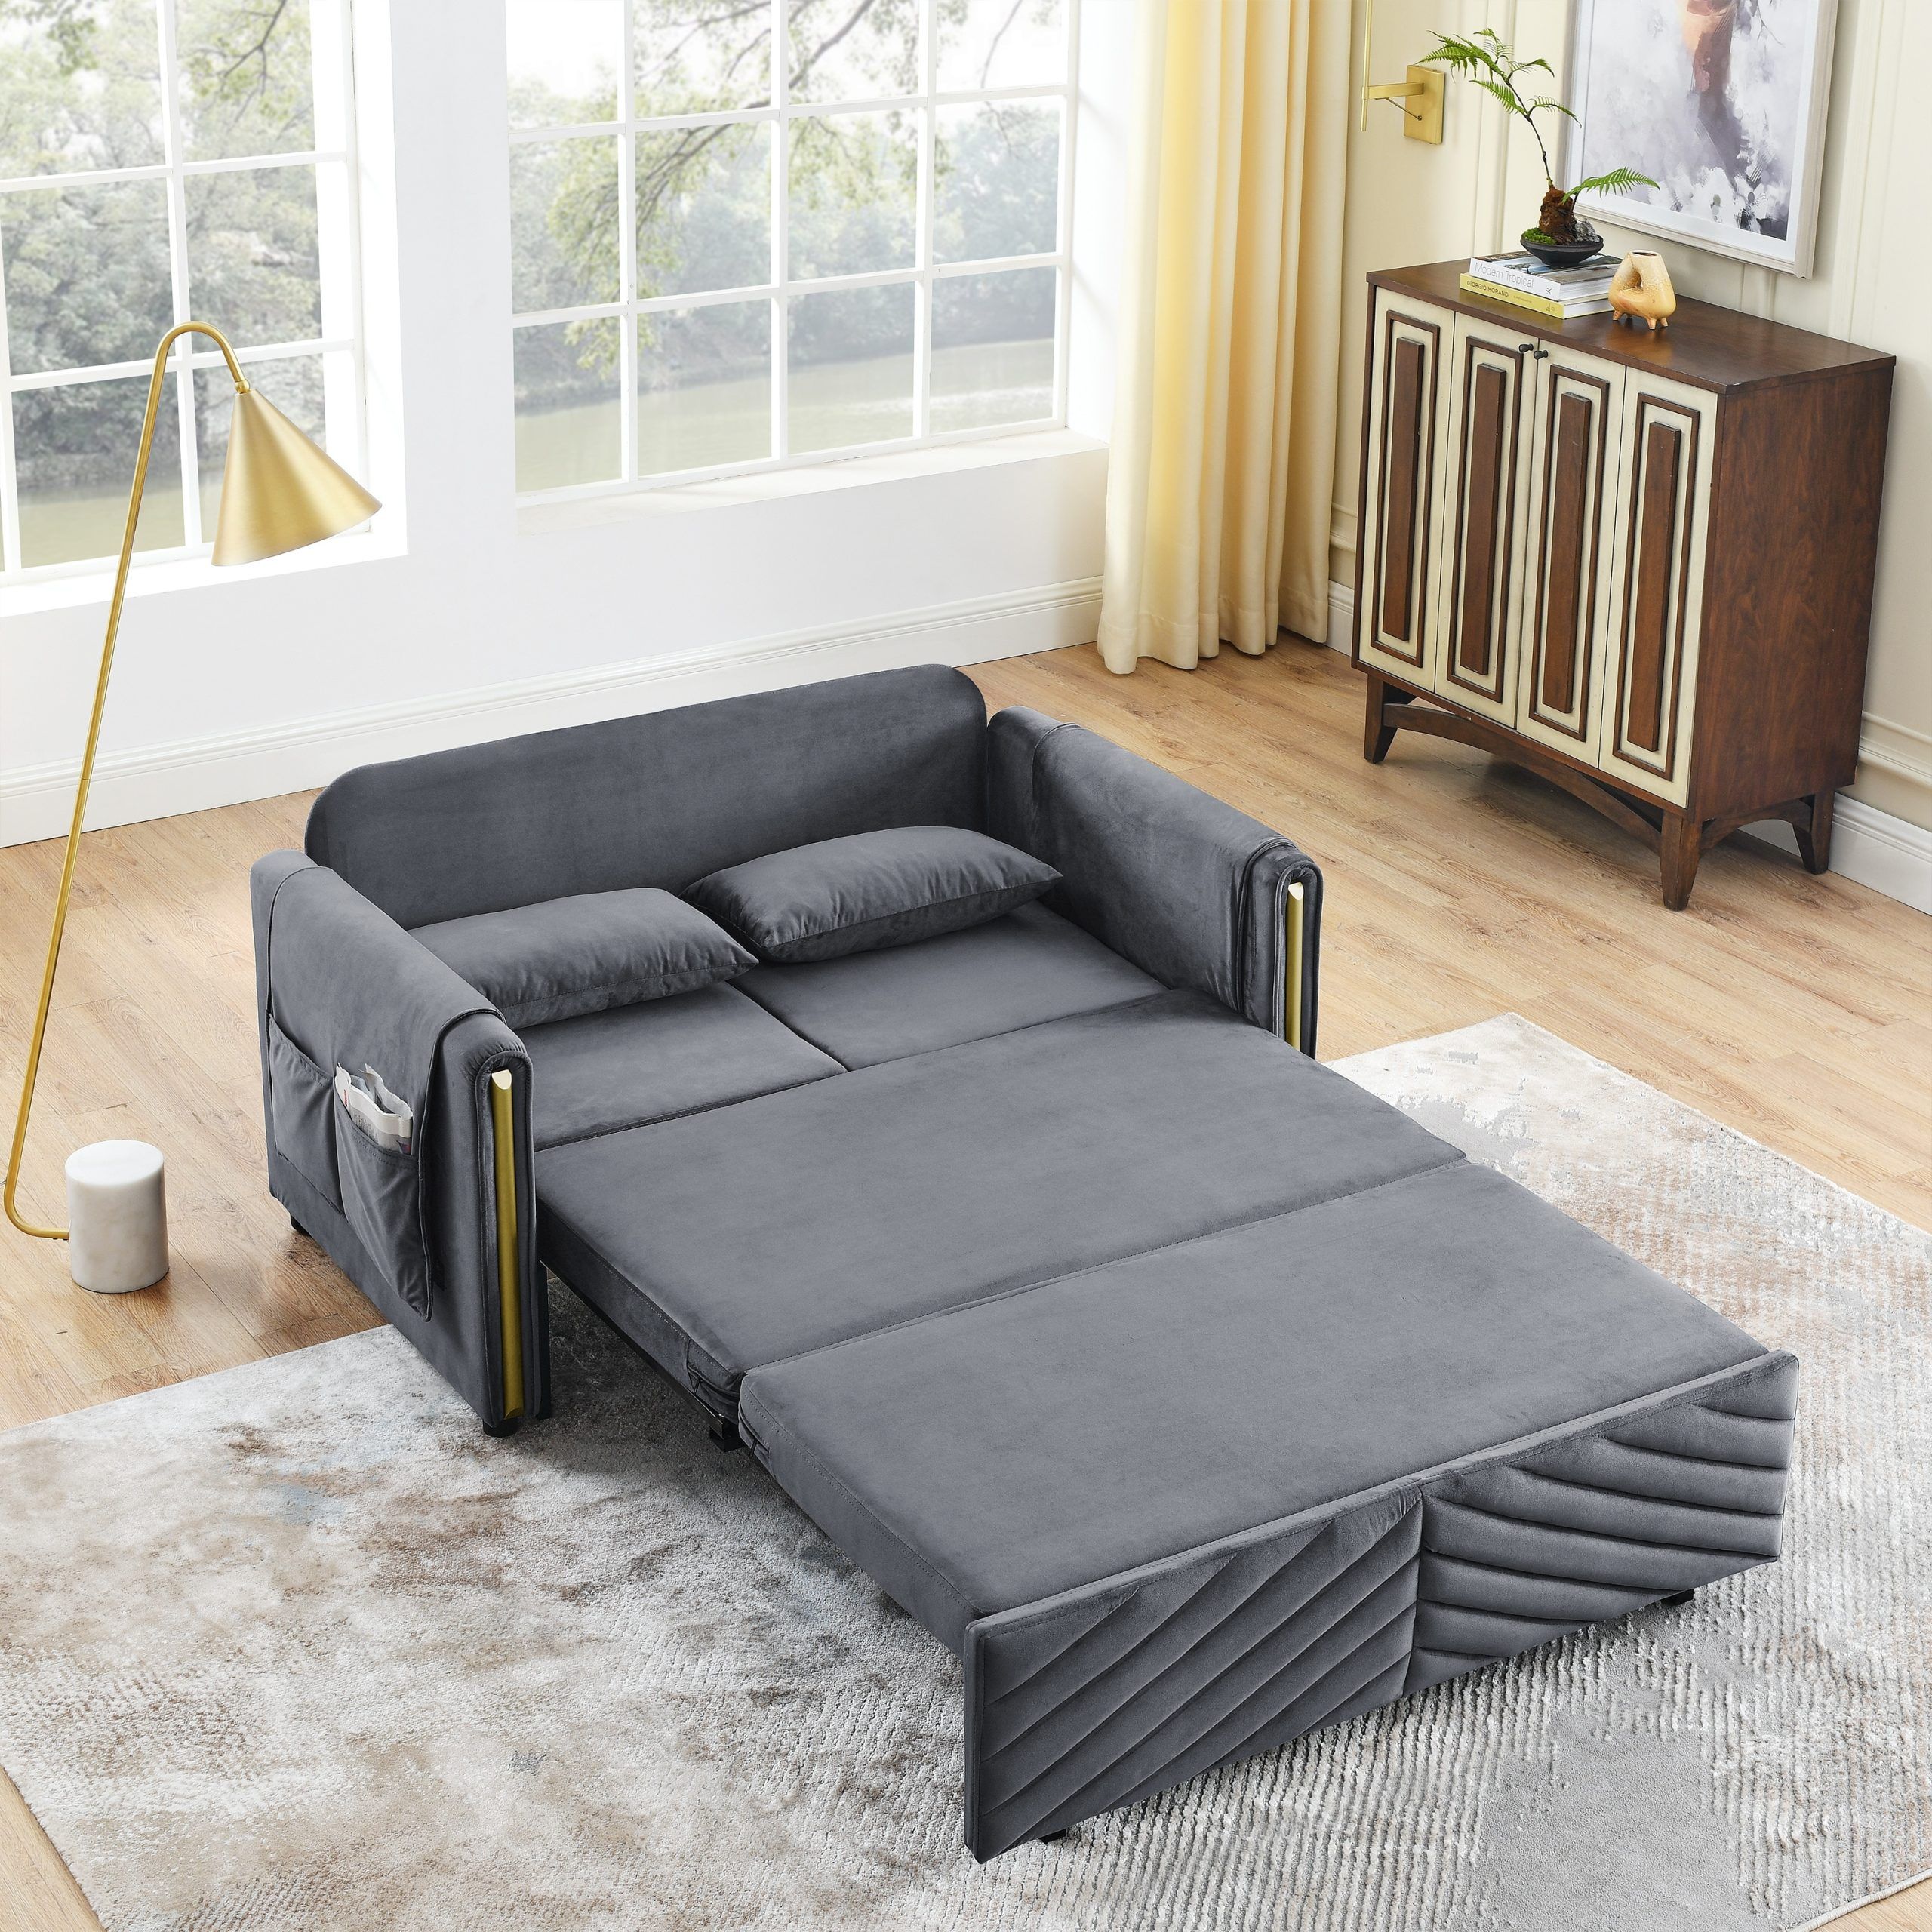 3 In 1 Convertible Sleeper Sofa Bed, 55" Multi Functional Pull Out Couch,  Velvet Loveseat Futon Bed W/2 Pillows & Storage Bags – Bed Bath & Beyond –  38908479 Pertaining To 3 In 1 Gray Pull Out Sleeper Sofas (View 6 of 15)